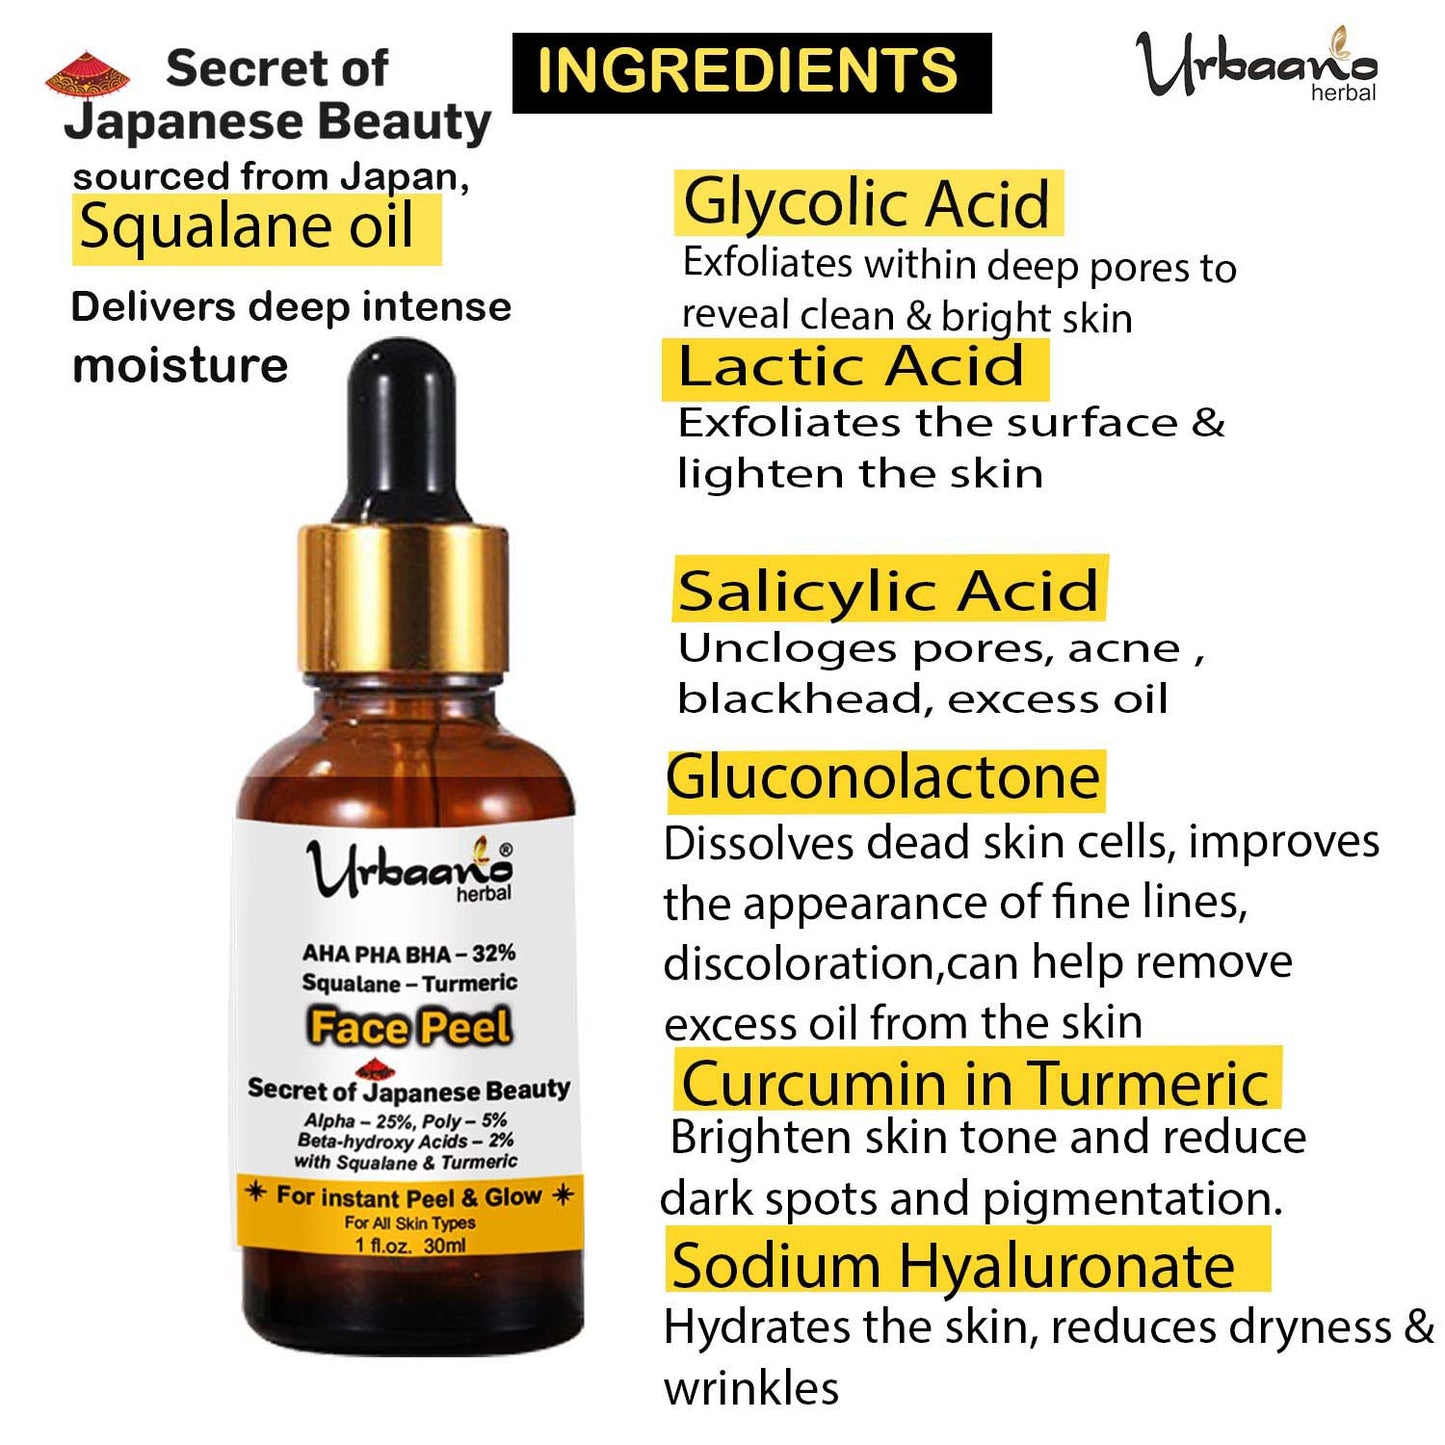 urbaano herbal aha turmeric face serum infused with glycolic, lactic acid, hyaluronic, olive squalane oil for nourishment, bright skin